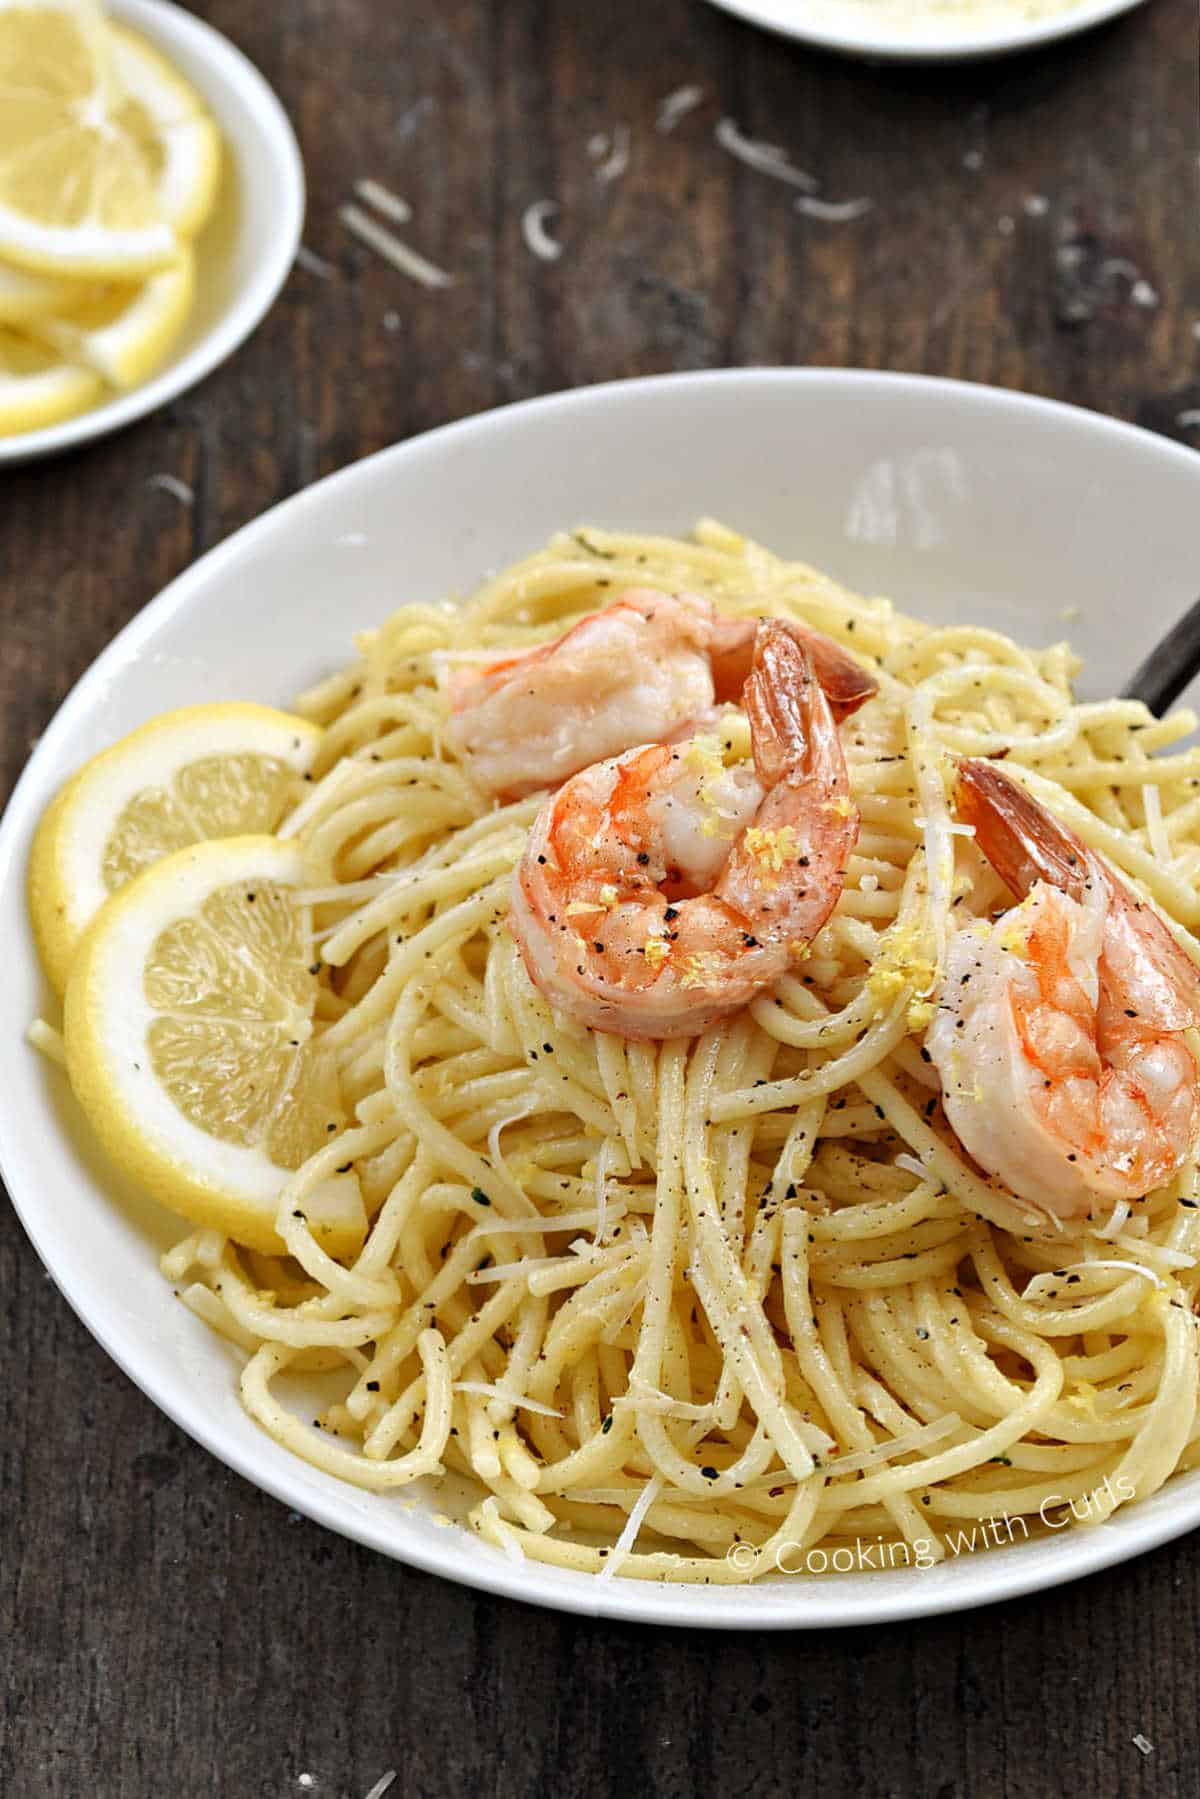 Spaghetti al Limone topped with cooked shrimp in a bowl.